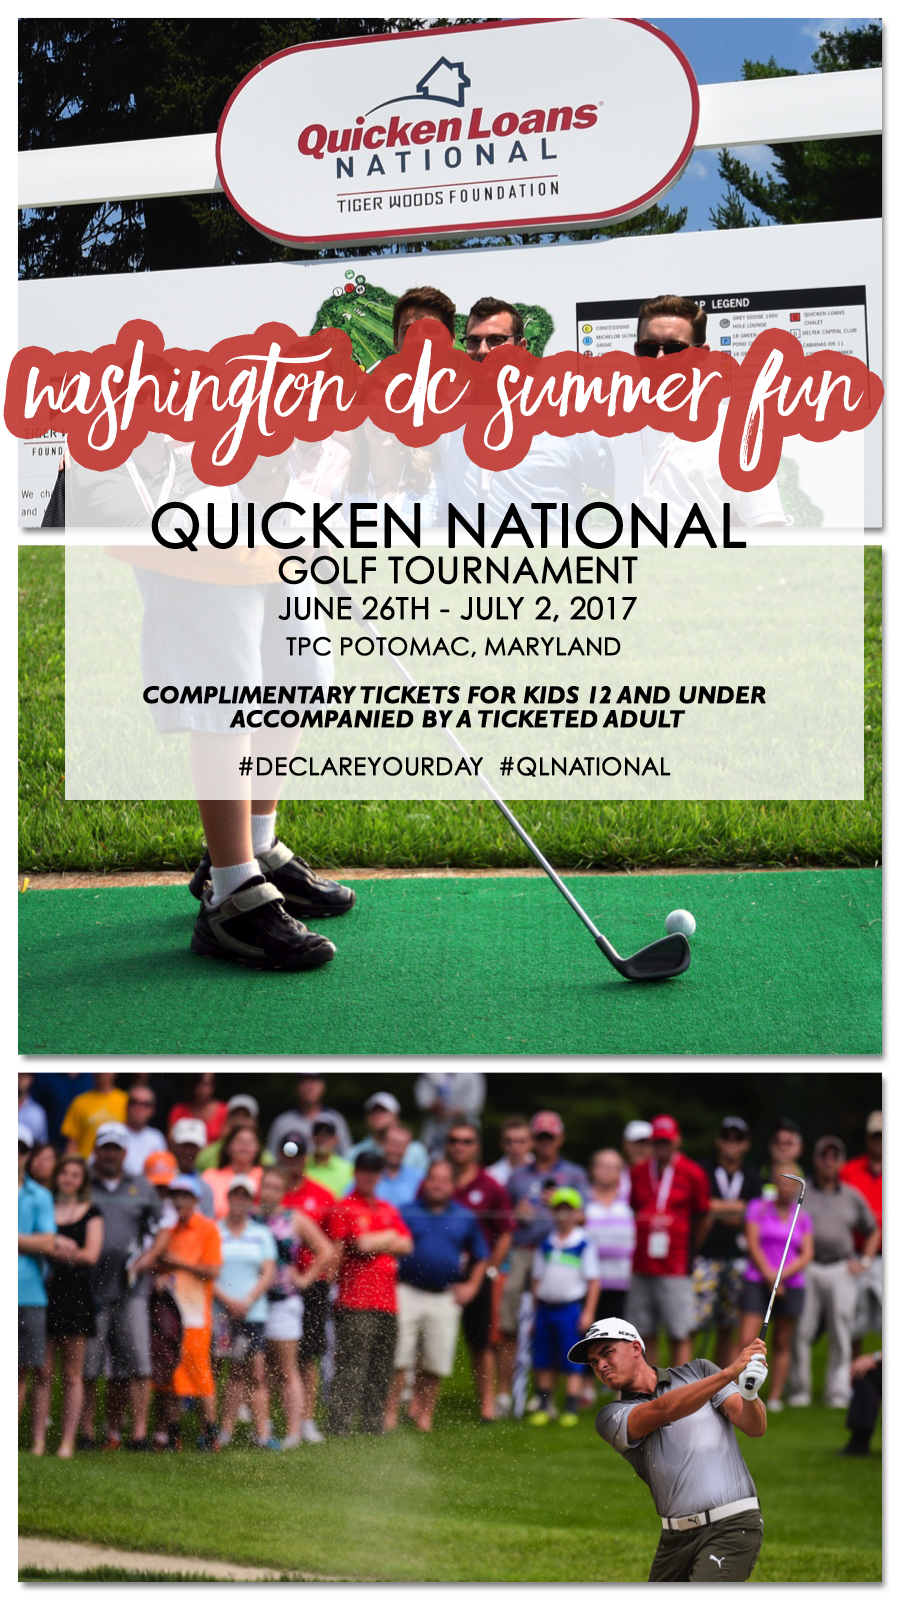 Things to Do DC Quicken Loans National Golf Tournament Tiger Woods Foundation via Misty Nelson mom blogger, family friendly events washington dc 